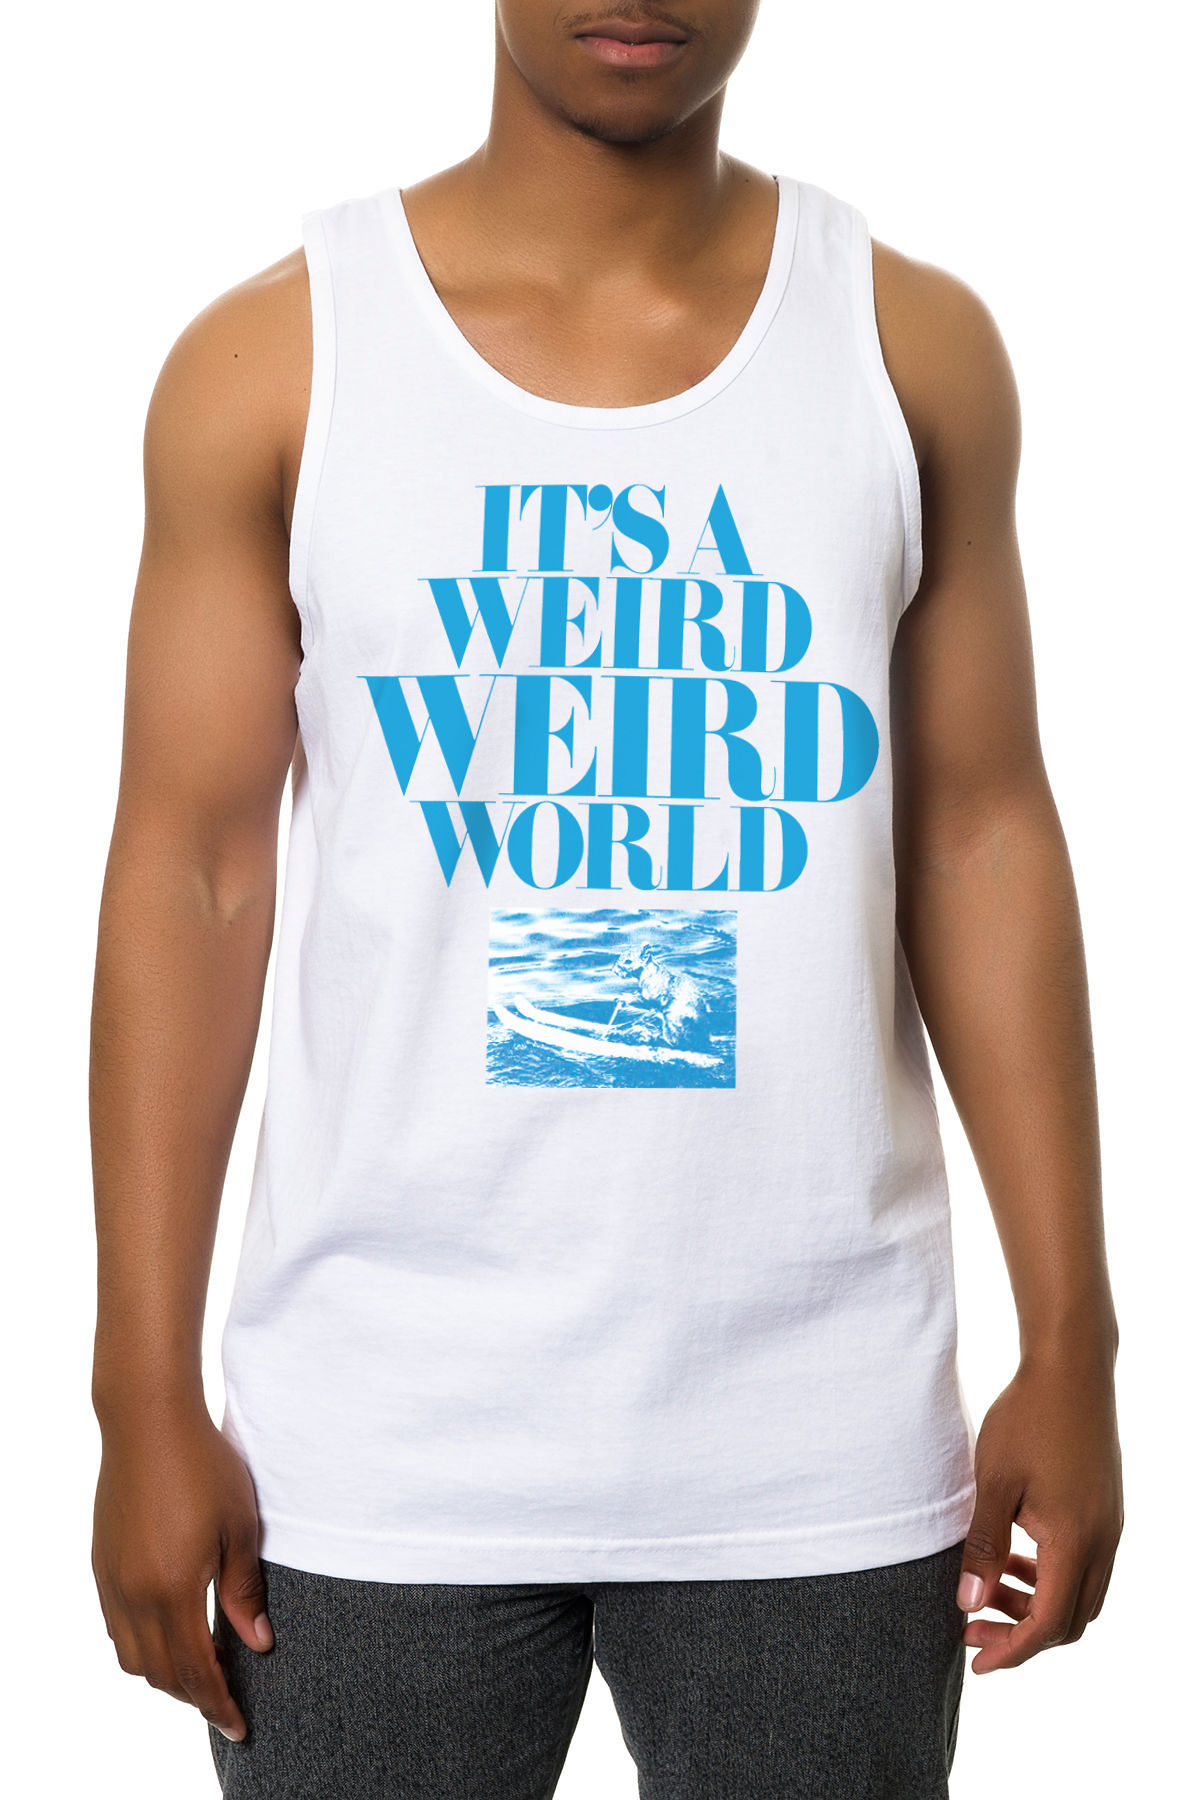 the weird world tank top in white